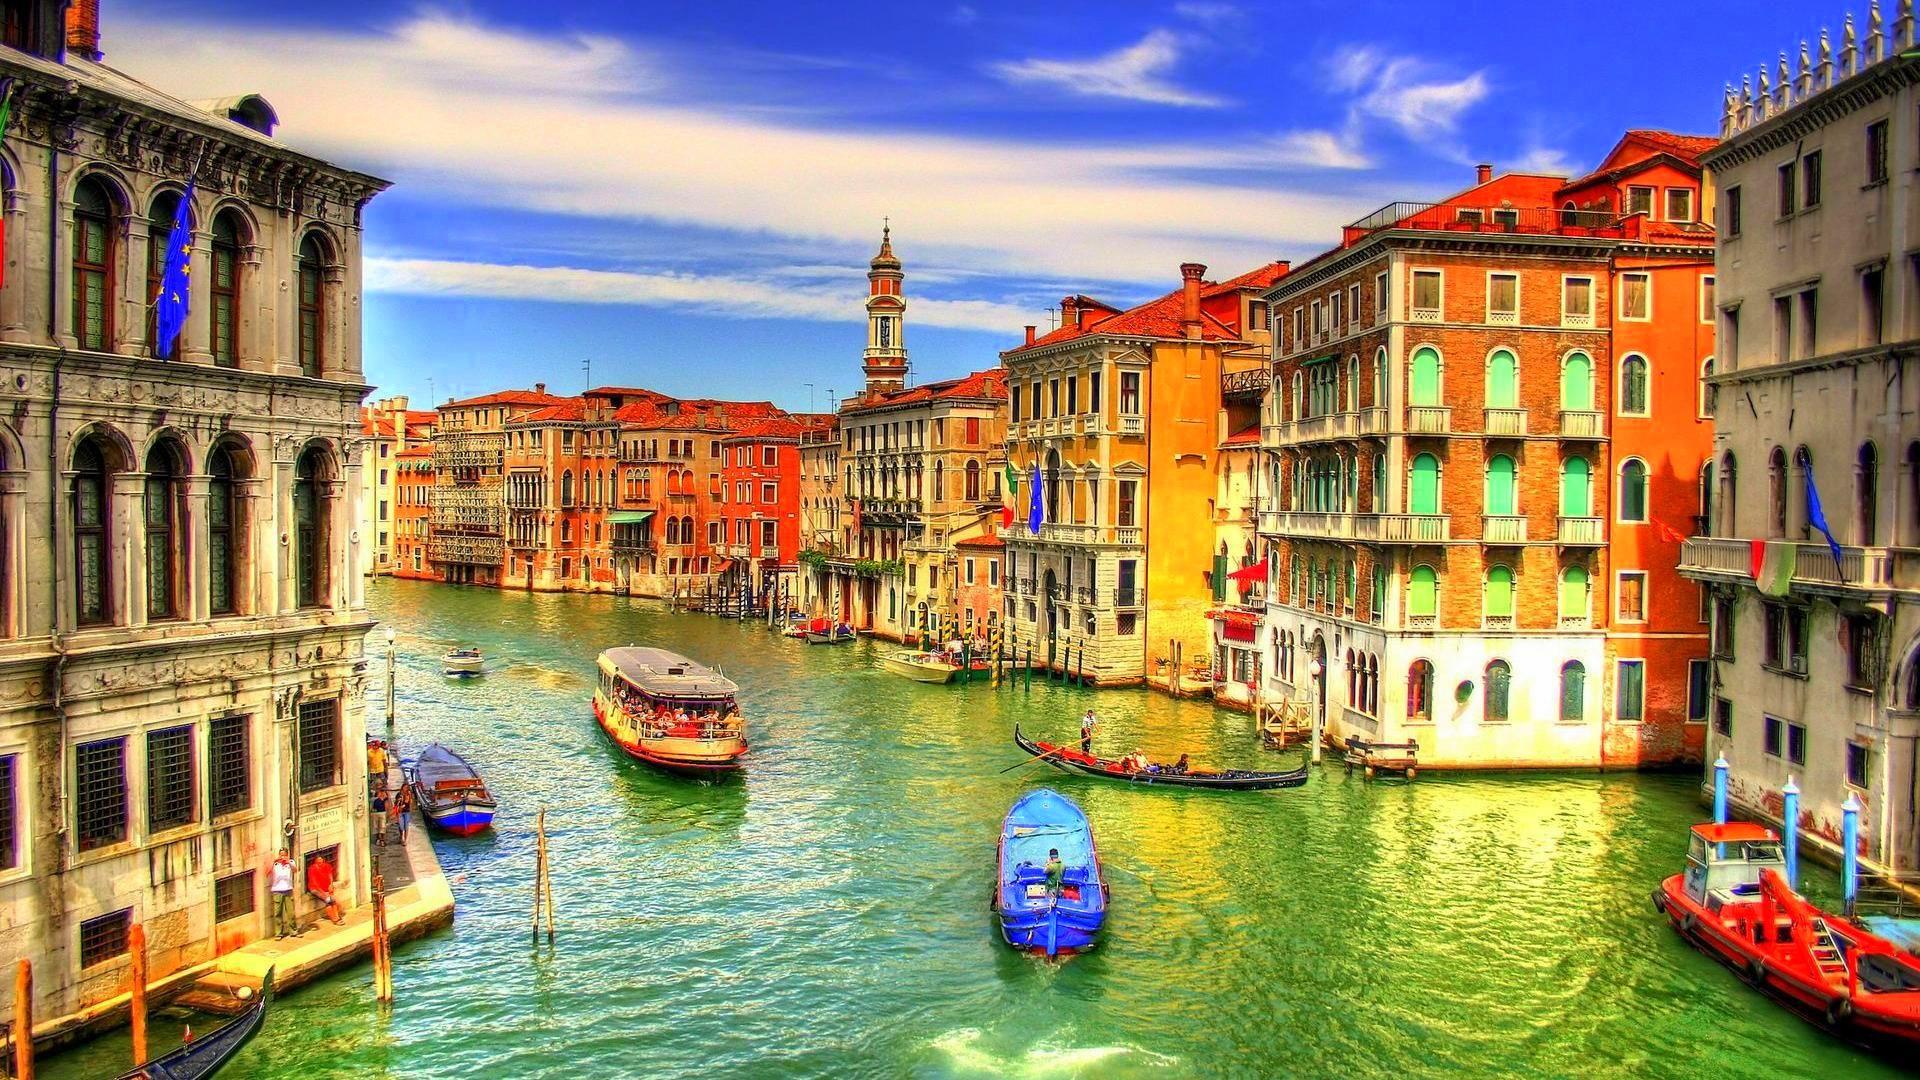 Venice City World Beautiful places HD Wallpaper. Places to Visit